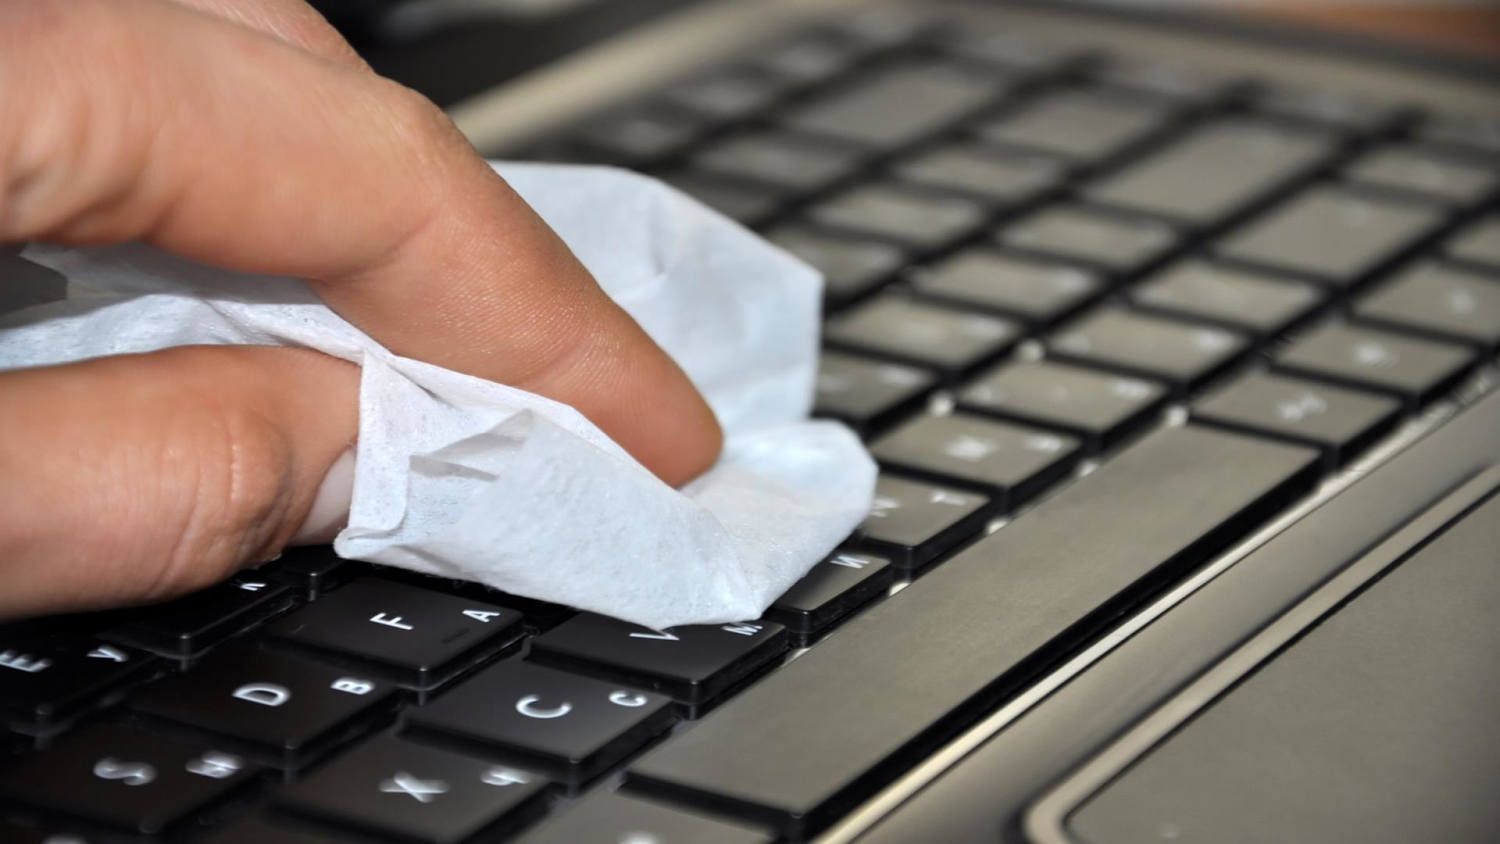 how to clean a macbook pro keyboard